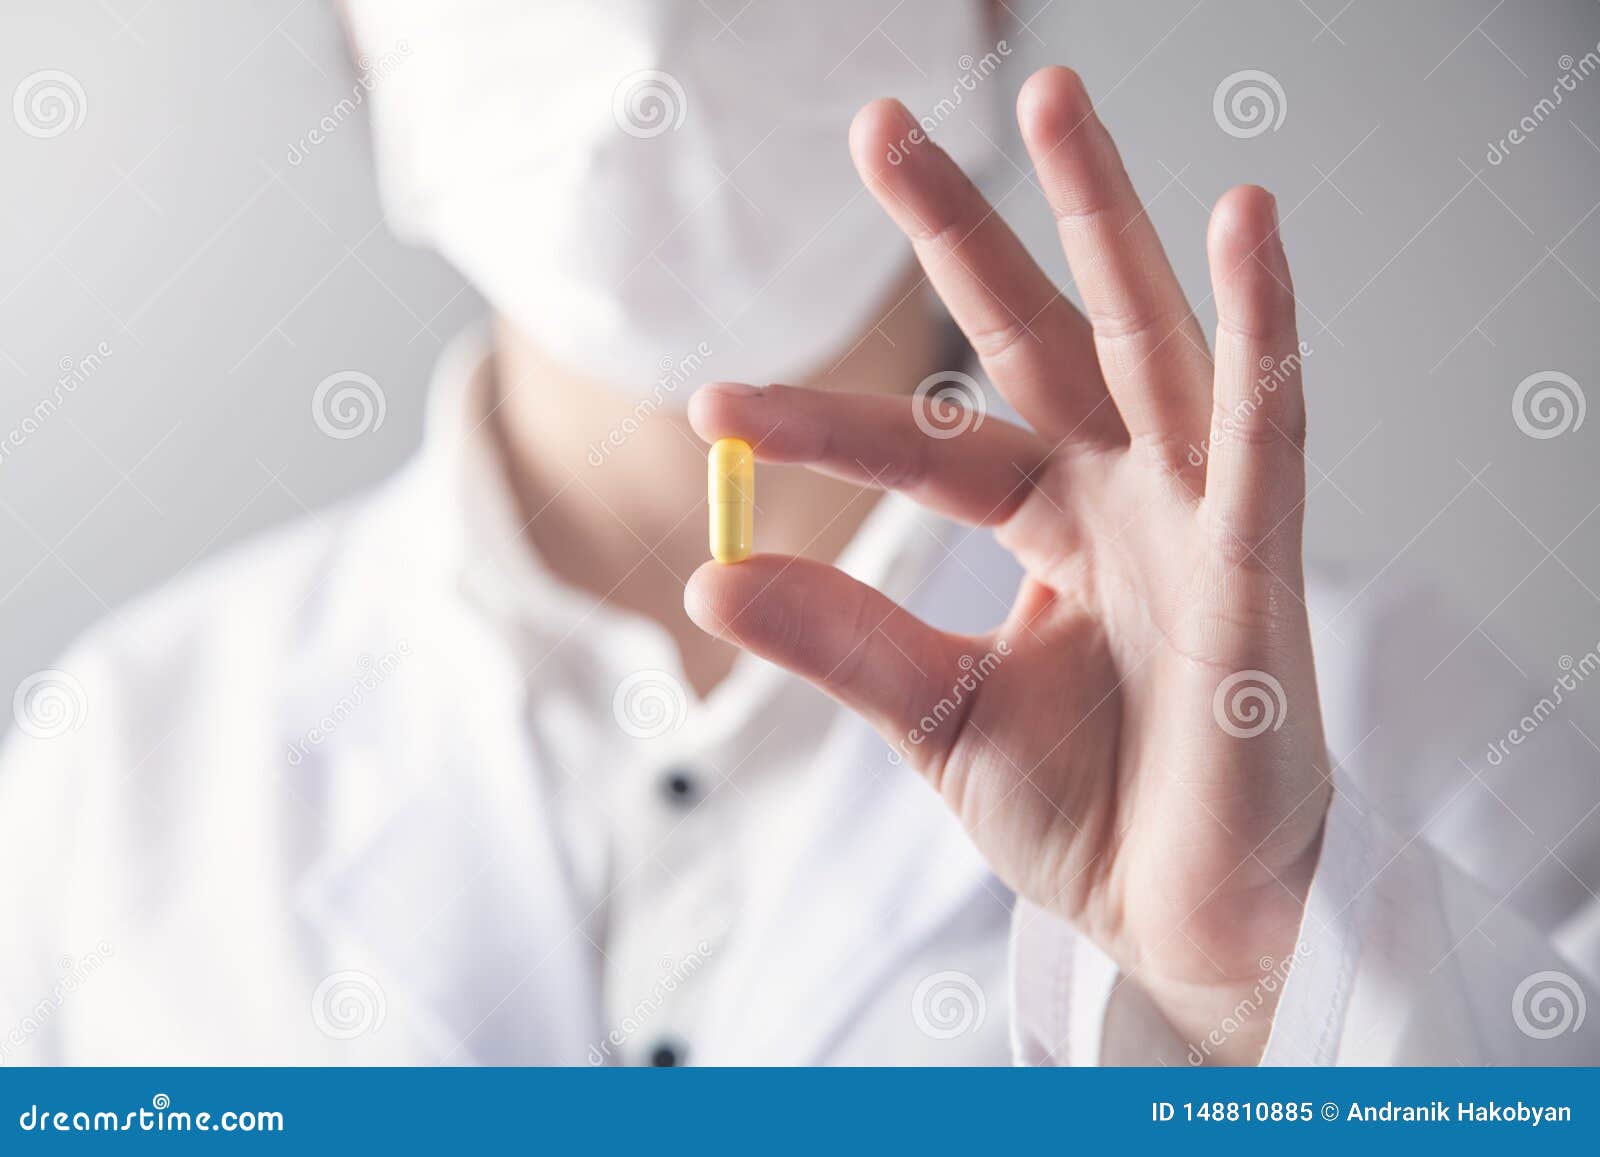 doctor holds yellow pill in his hand. medical concept